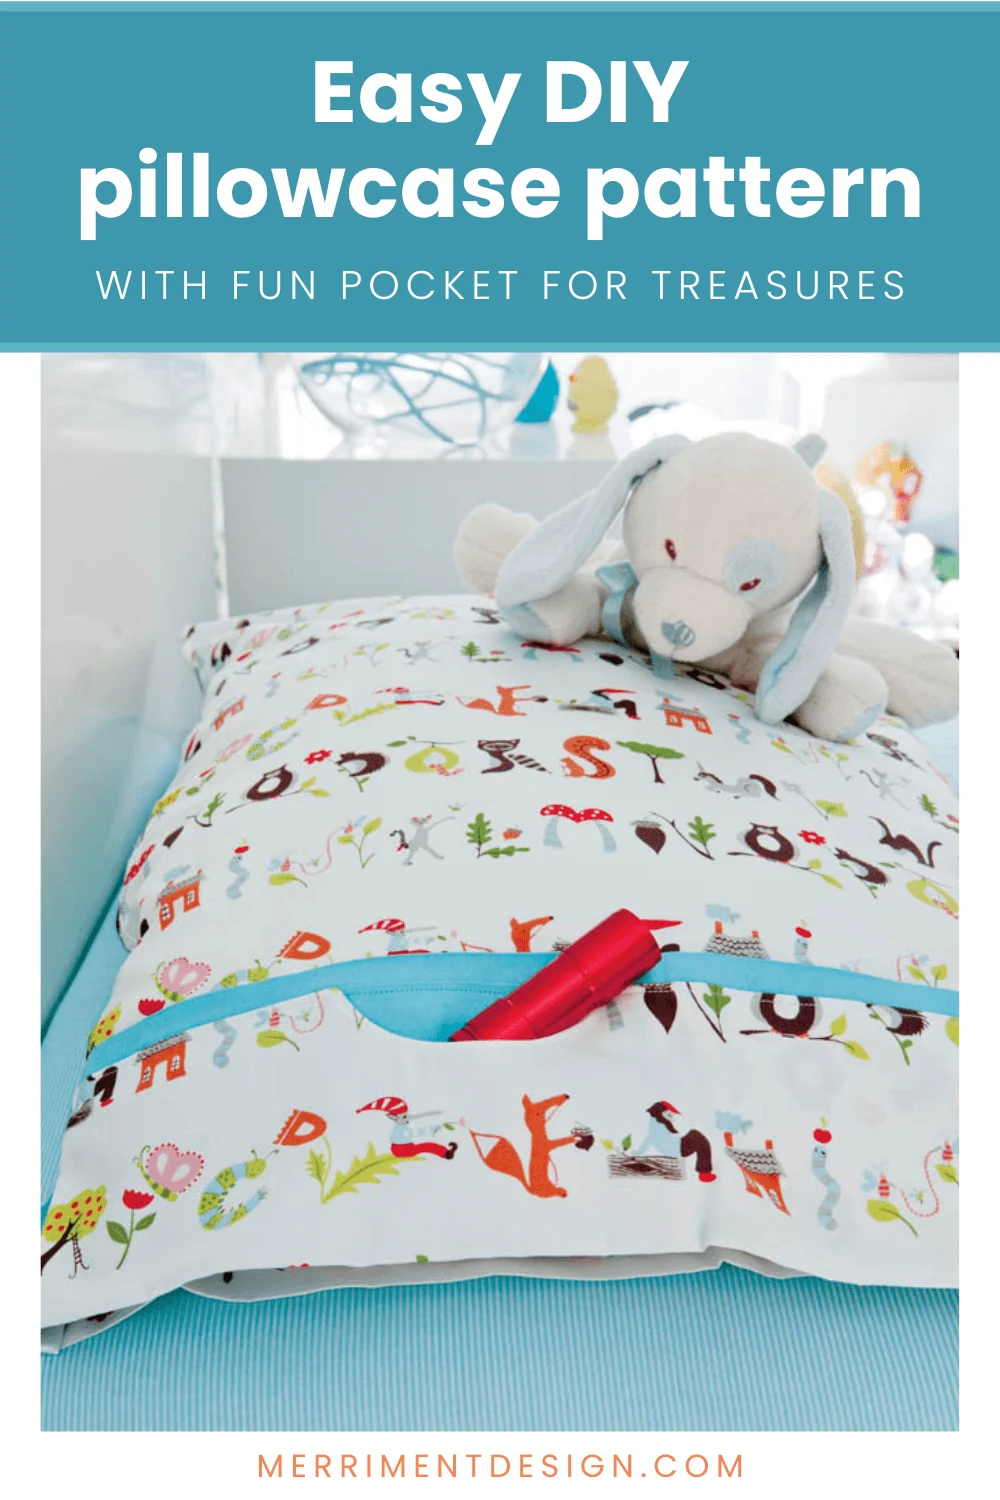 Easy DIY pillowcase pattern with pocket for nighttime treasures